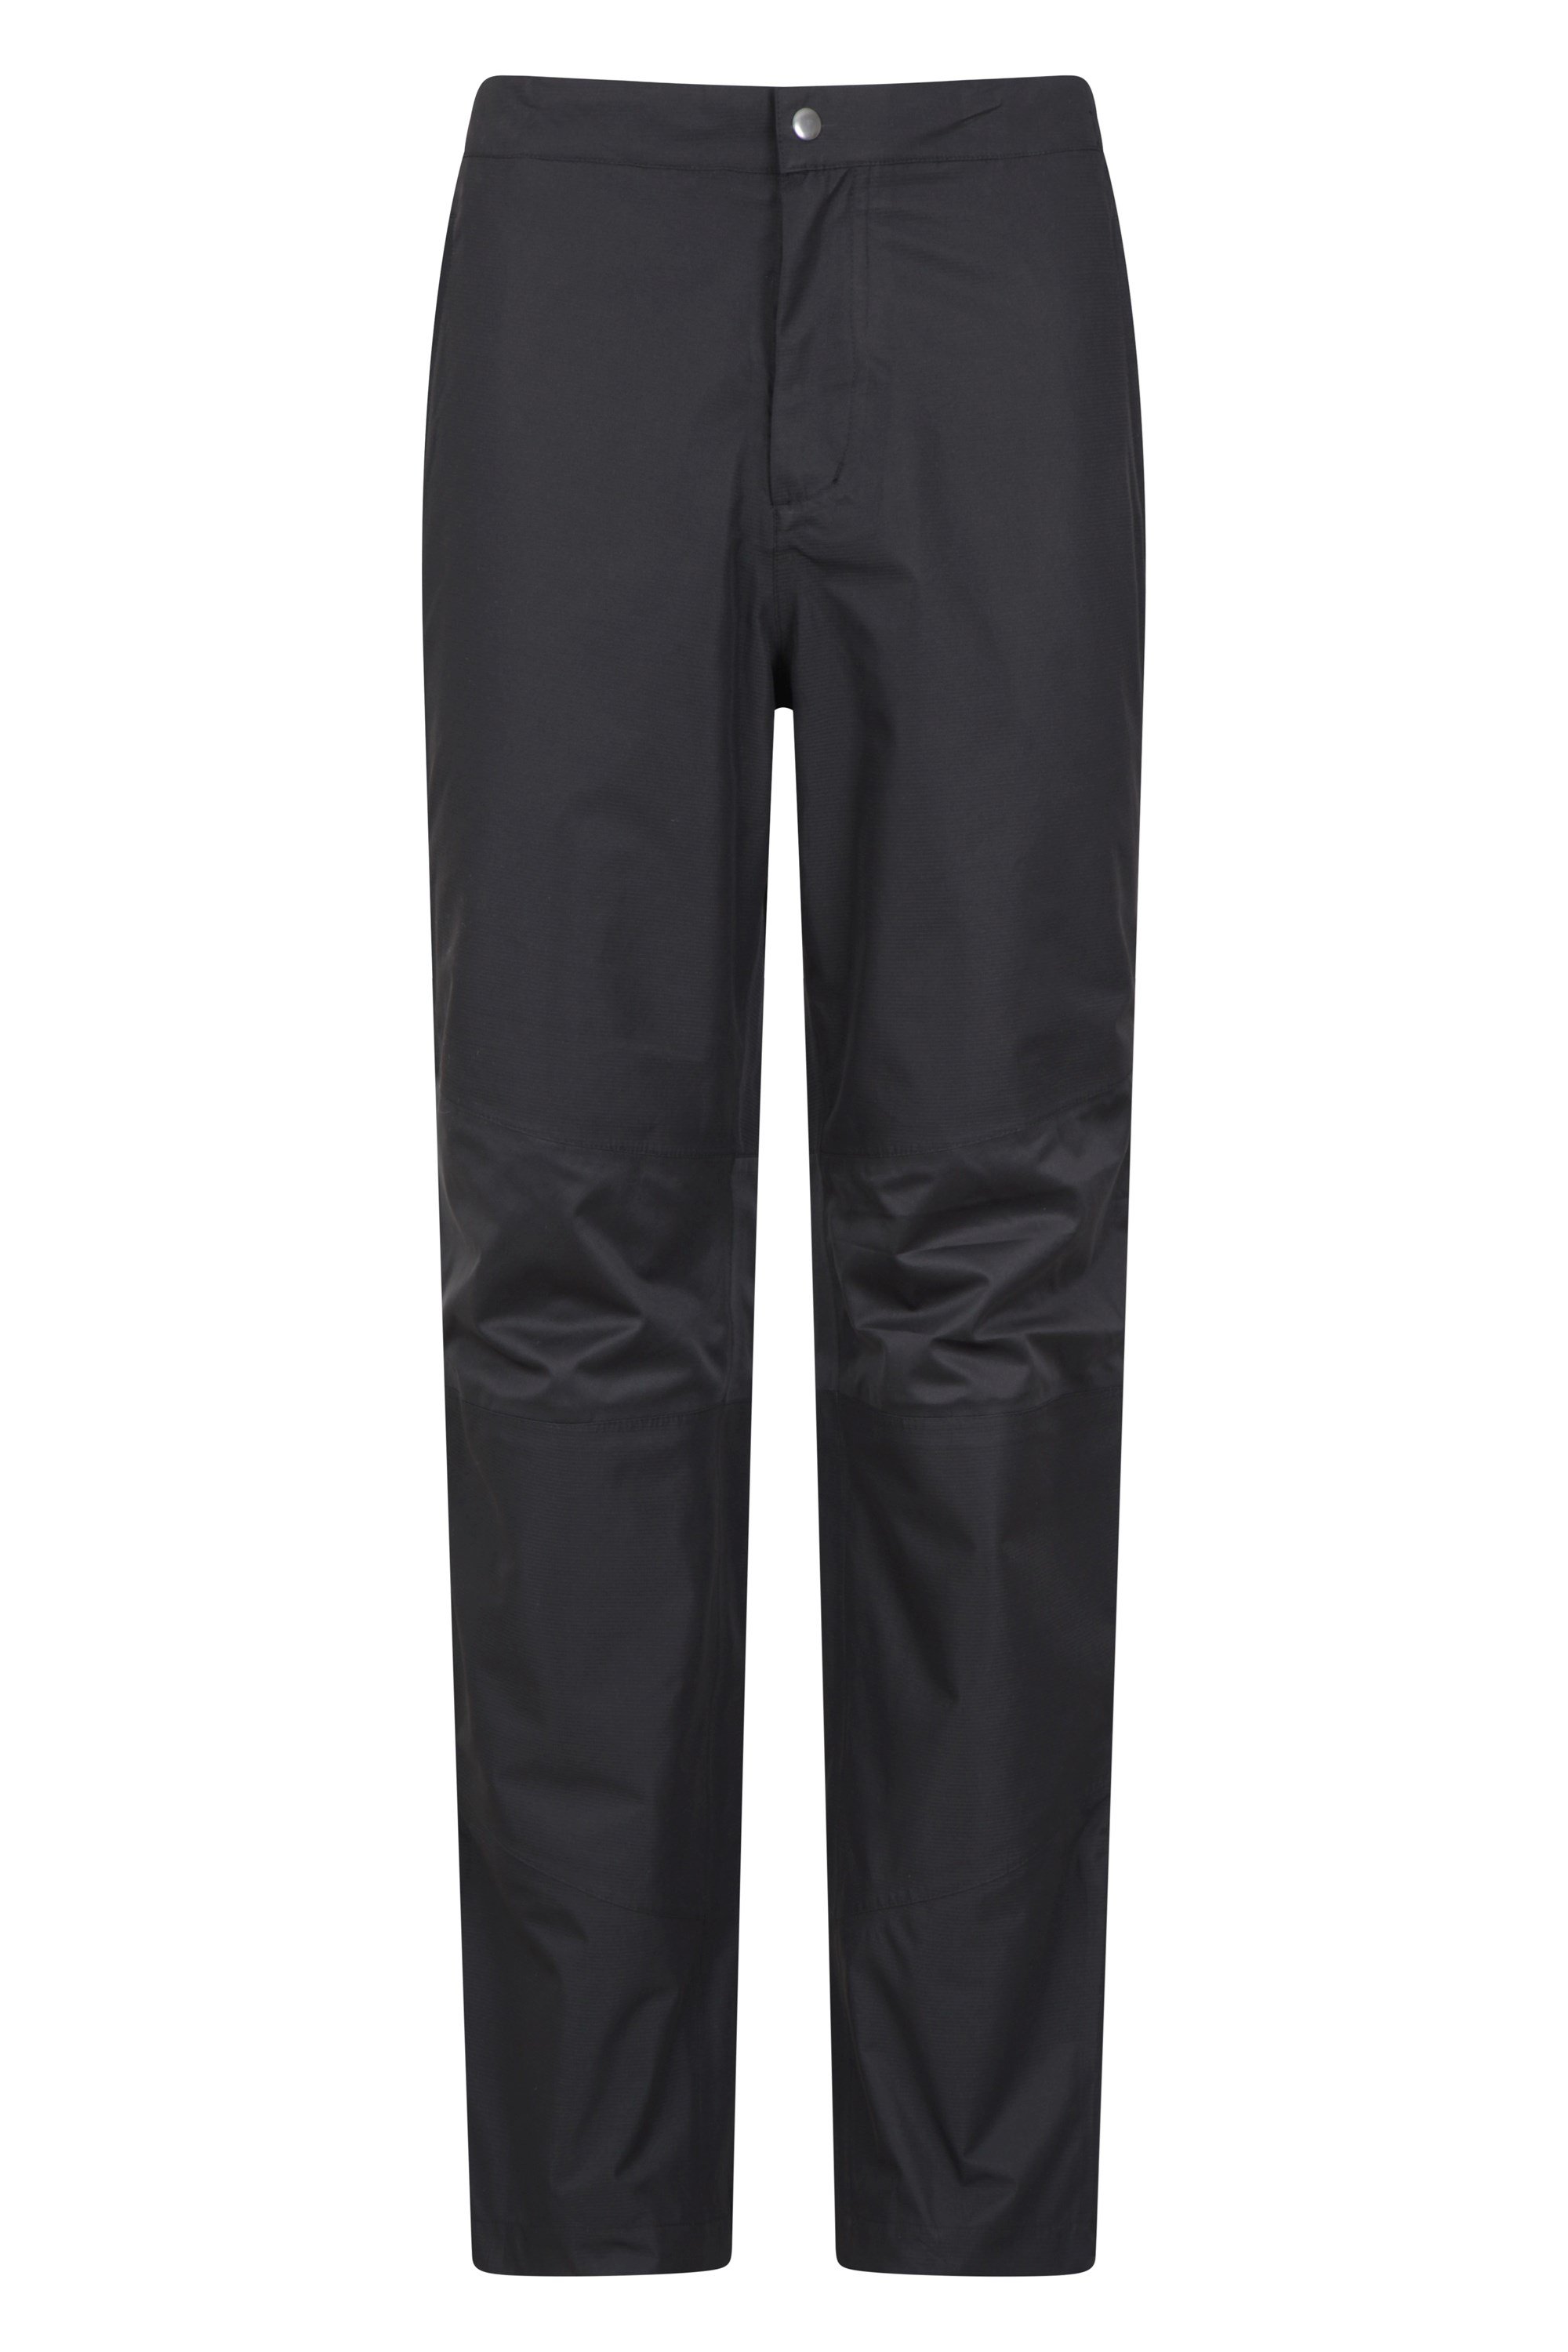 10 best waterproof trousers for women 2023 UK  Tried and tested